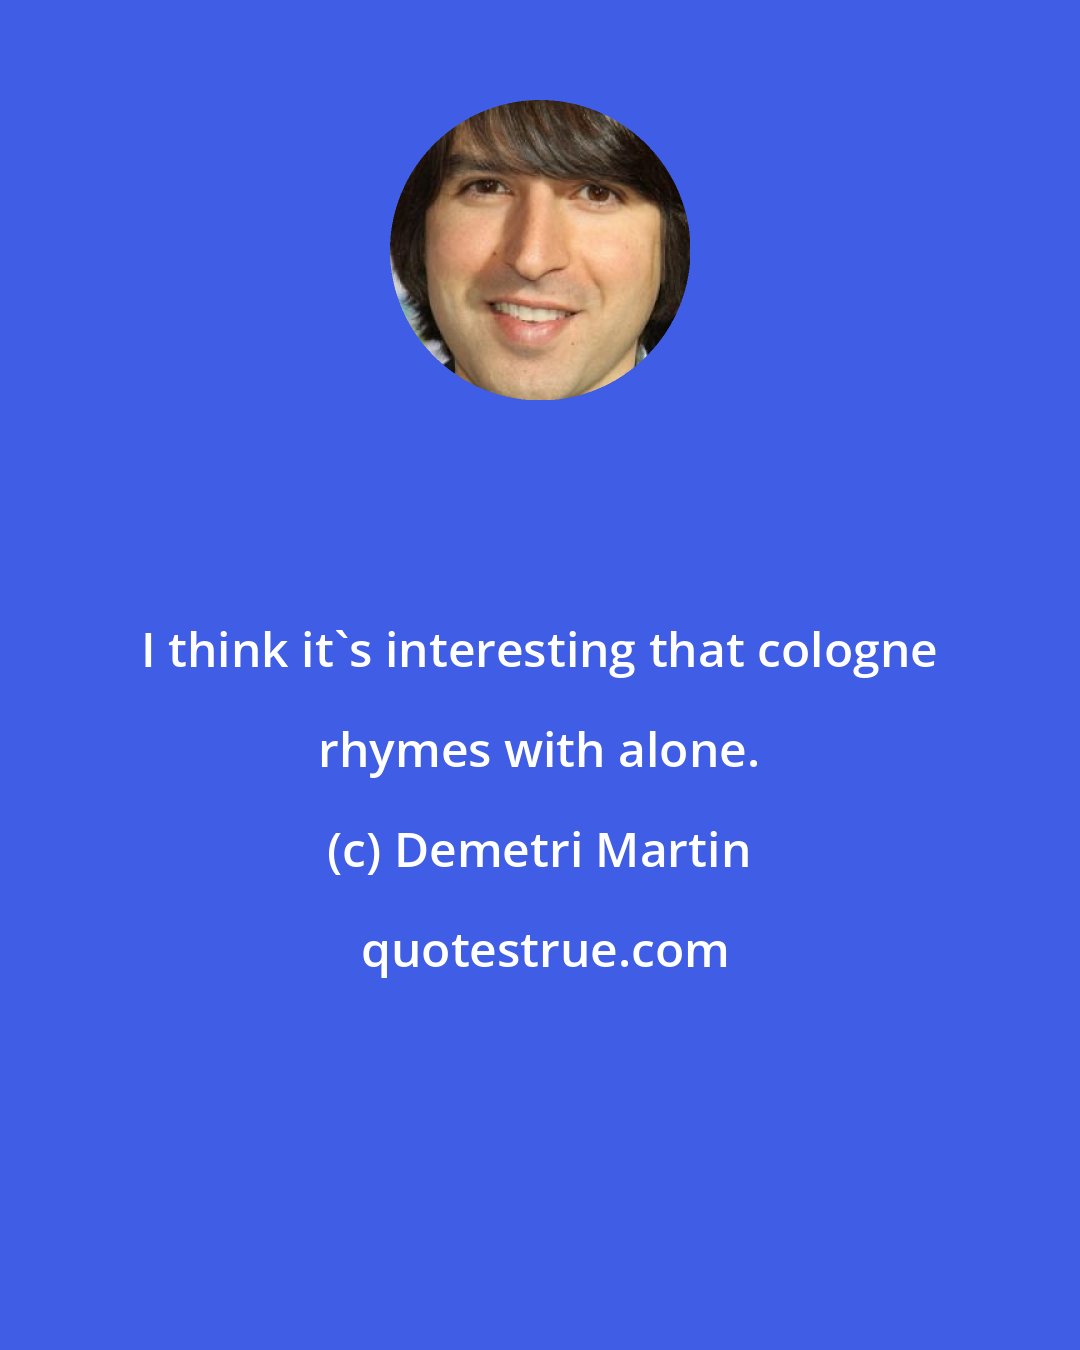 Demetri Martin: I think it's interesting that cologne rhymes with alone.